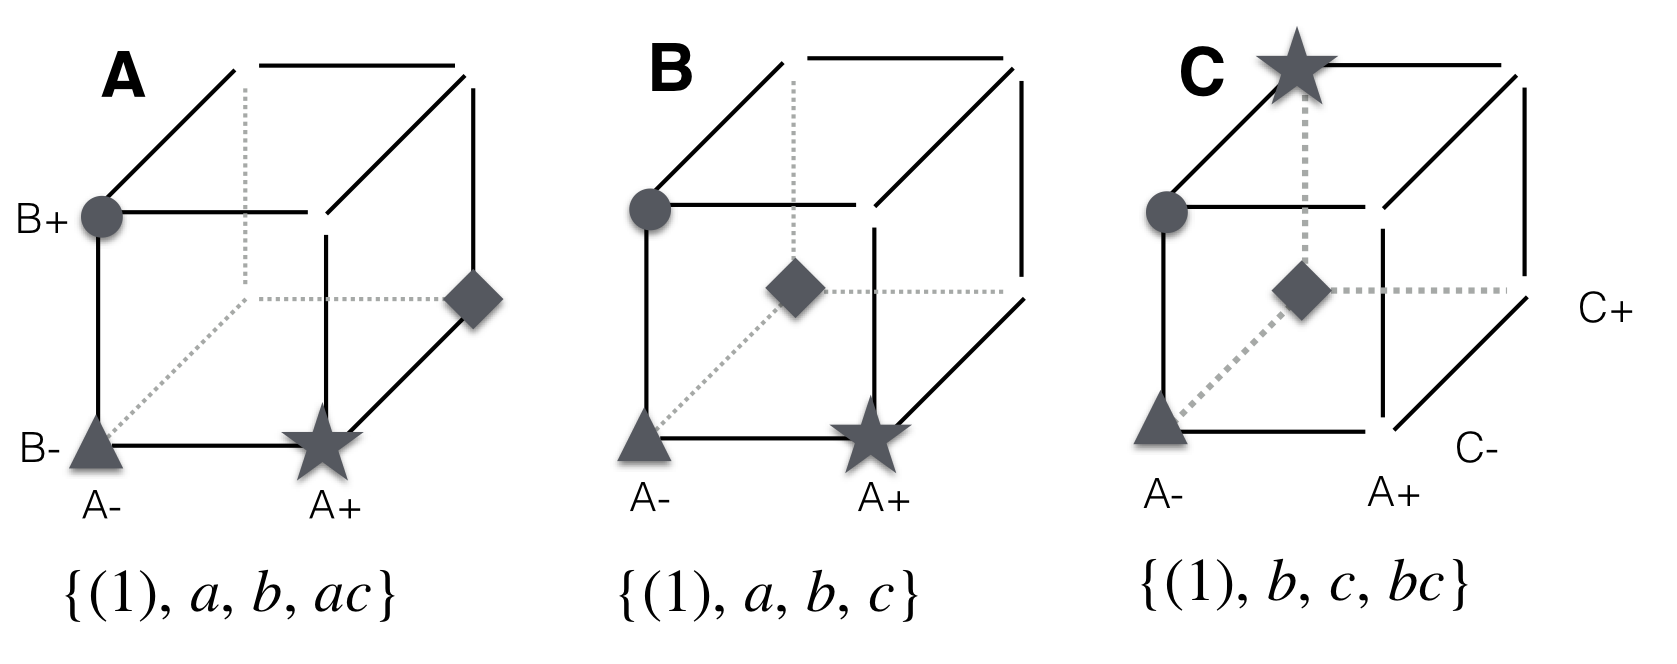 Subsets of a $2^3$-factorial. A: Arbitrary choice of treatment combinations leads to problems in estimating any effects properly. B: One variable at a time (OVAT) design. C: Keeping one factor at a constant level confounds this factor with the grand mean and creates a $2^2$-factorial of the remaining factors.